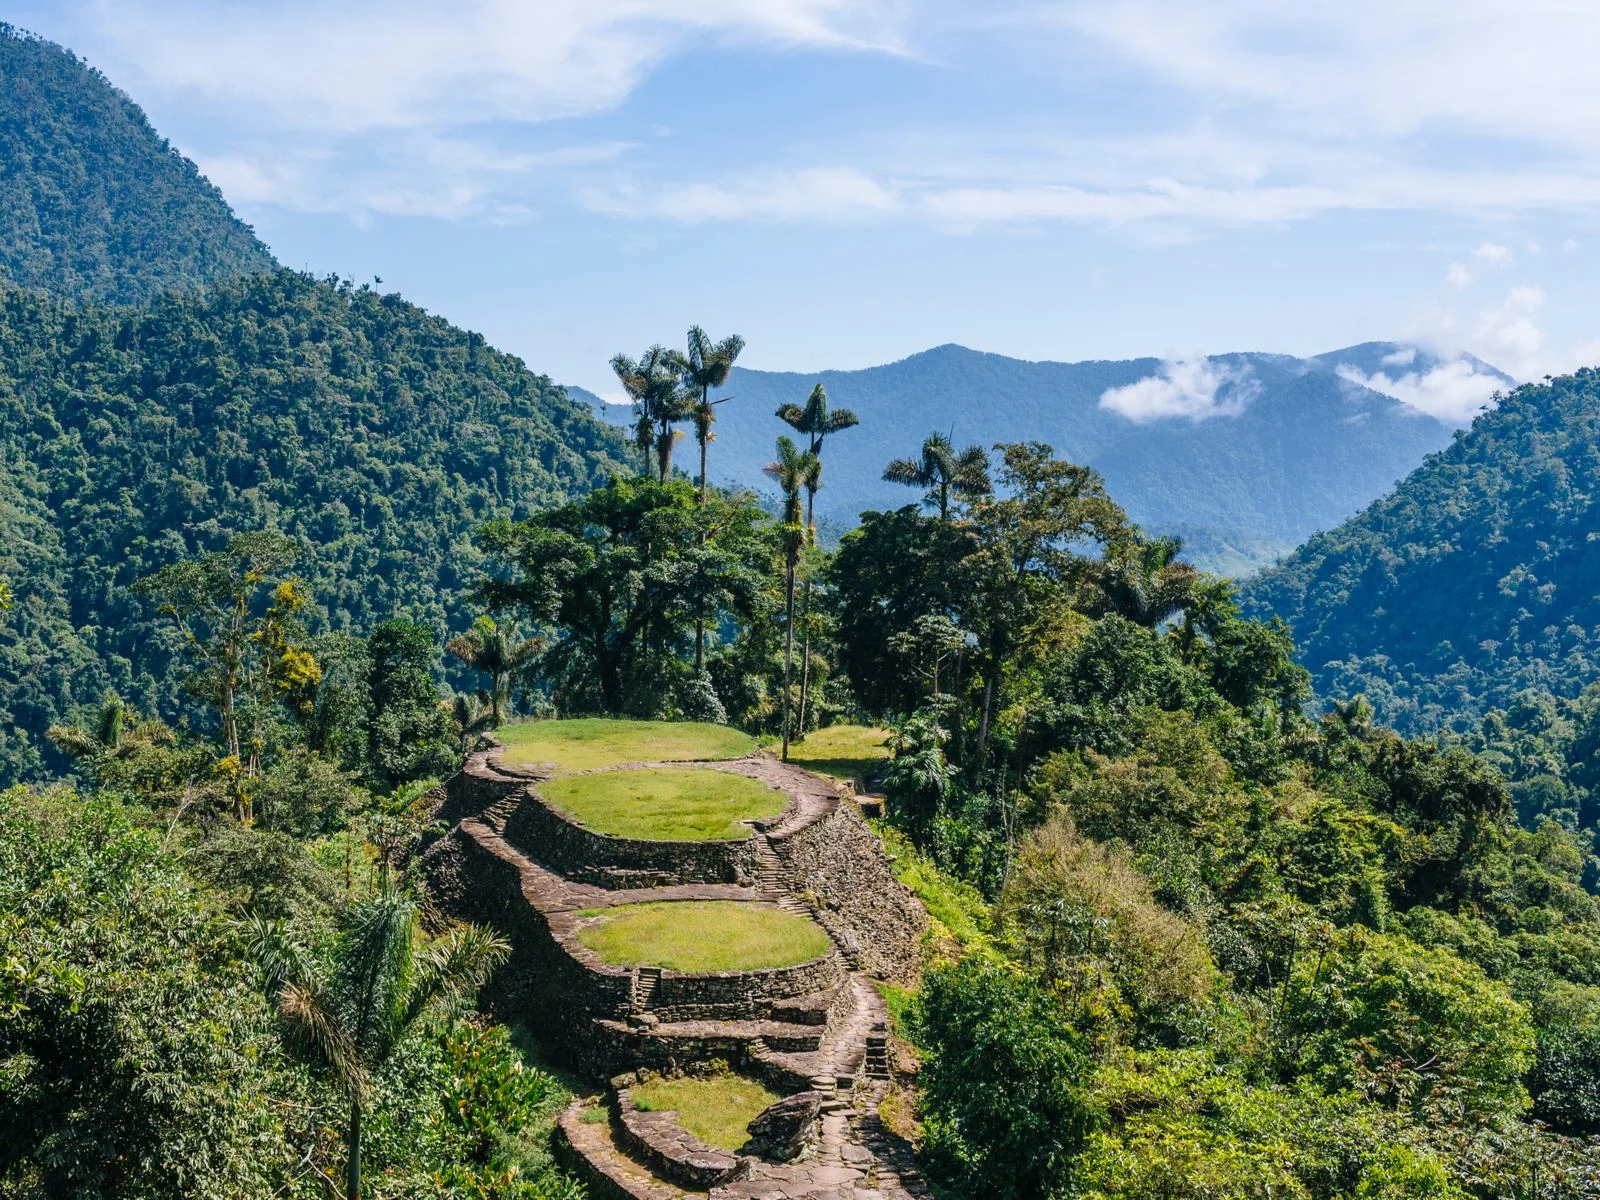 Lost City of Ciudad Perdida and the terraces by the city pictured during the cheapest time to go to Colombia